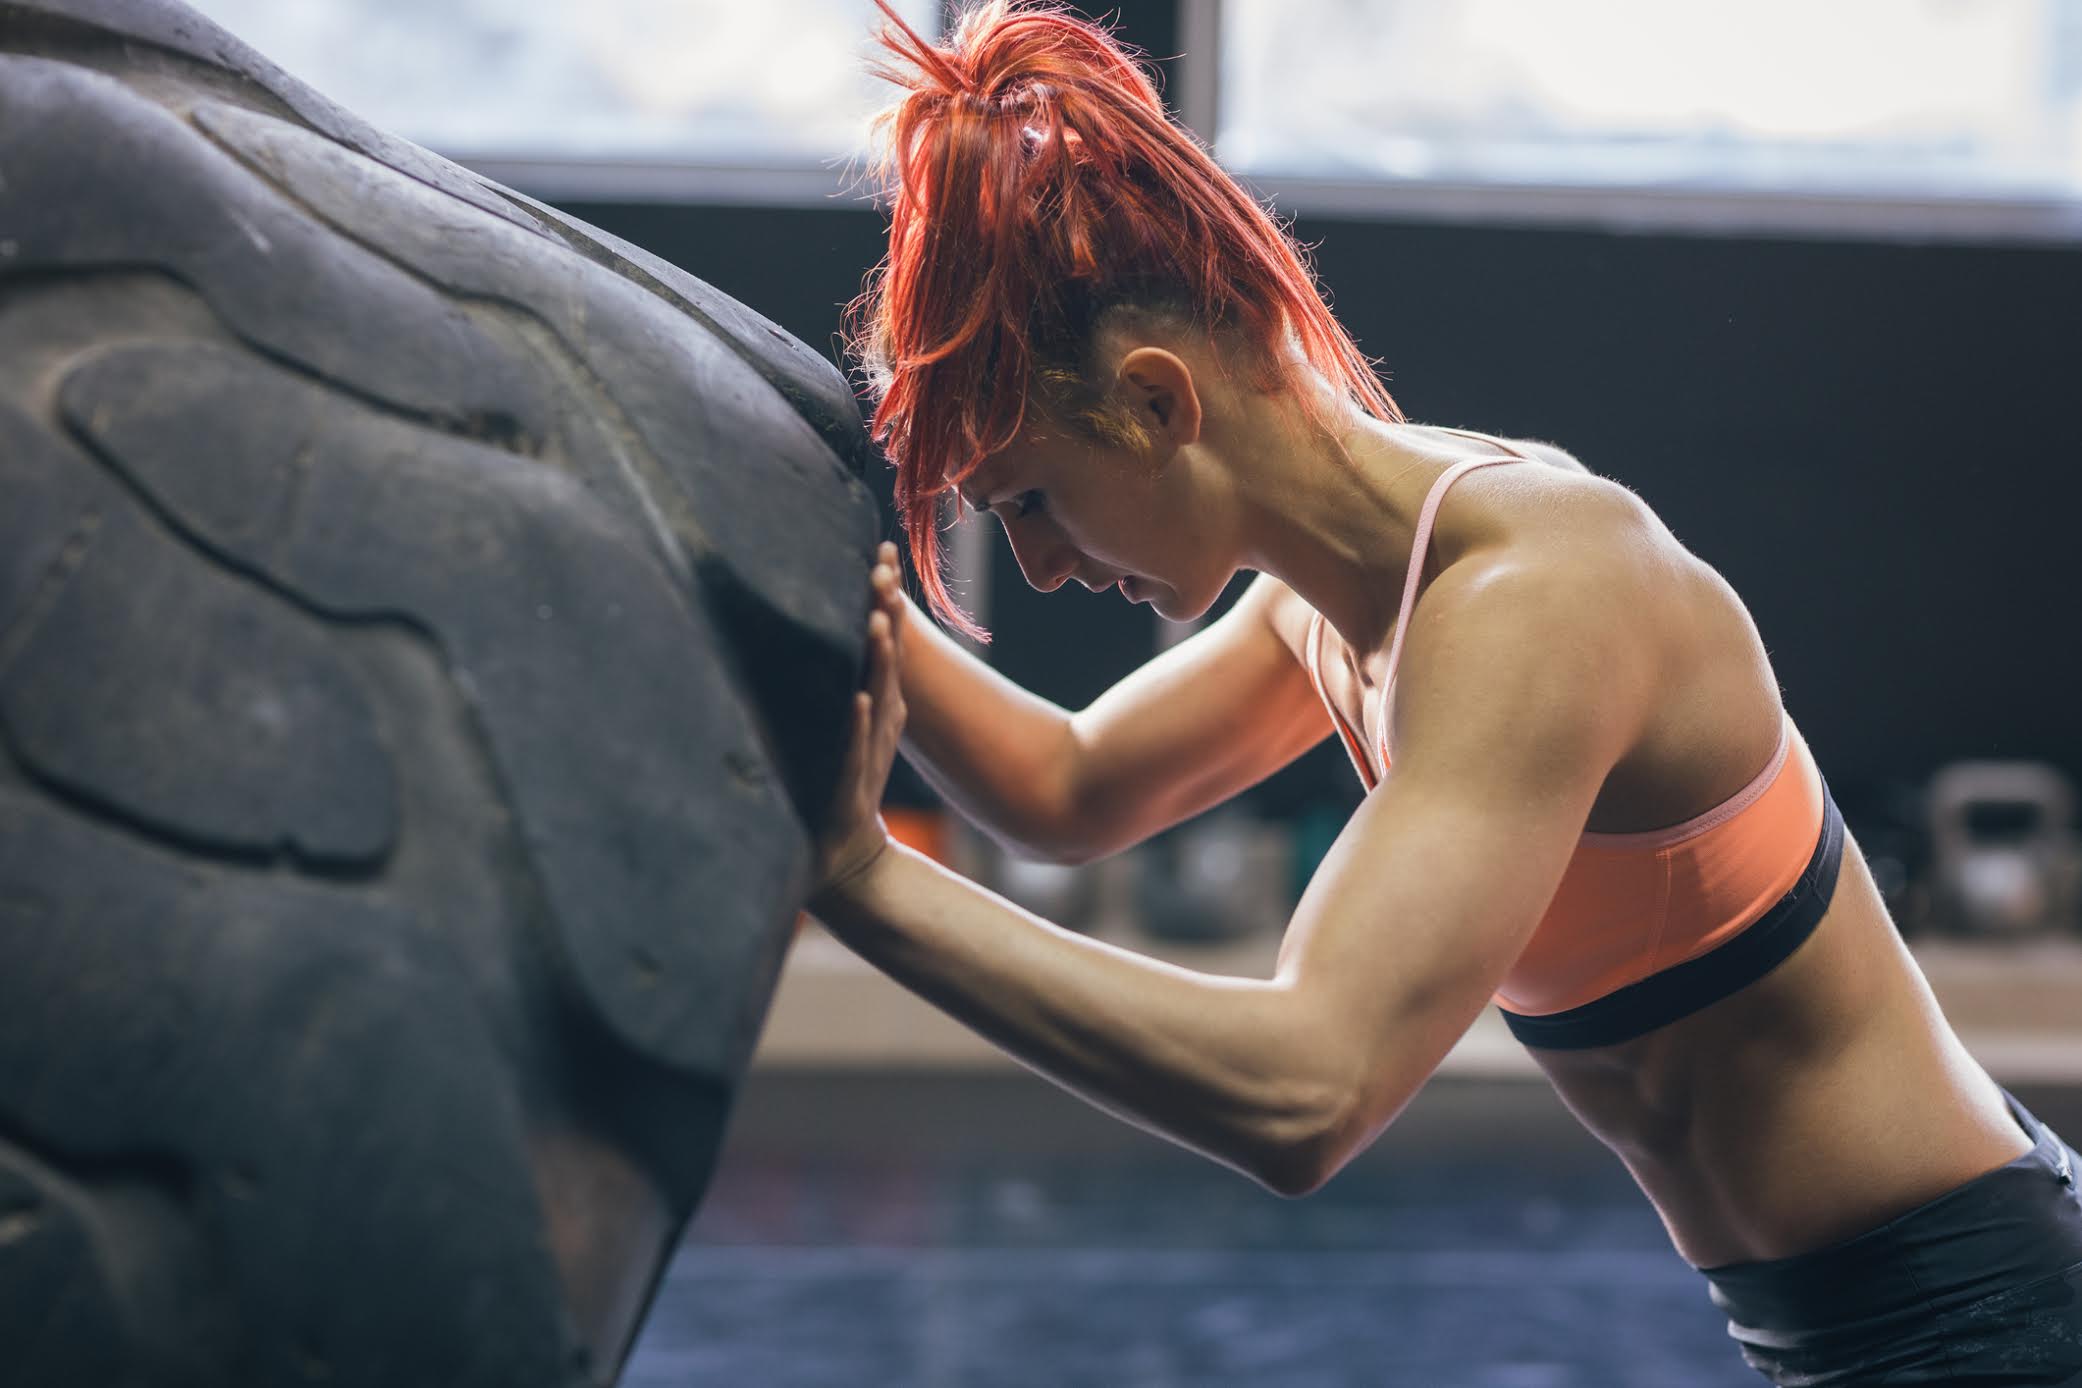 The psychology behind building a revenge body